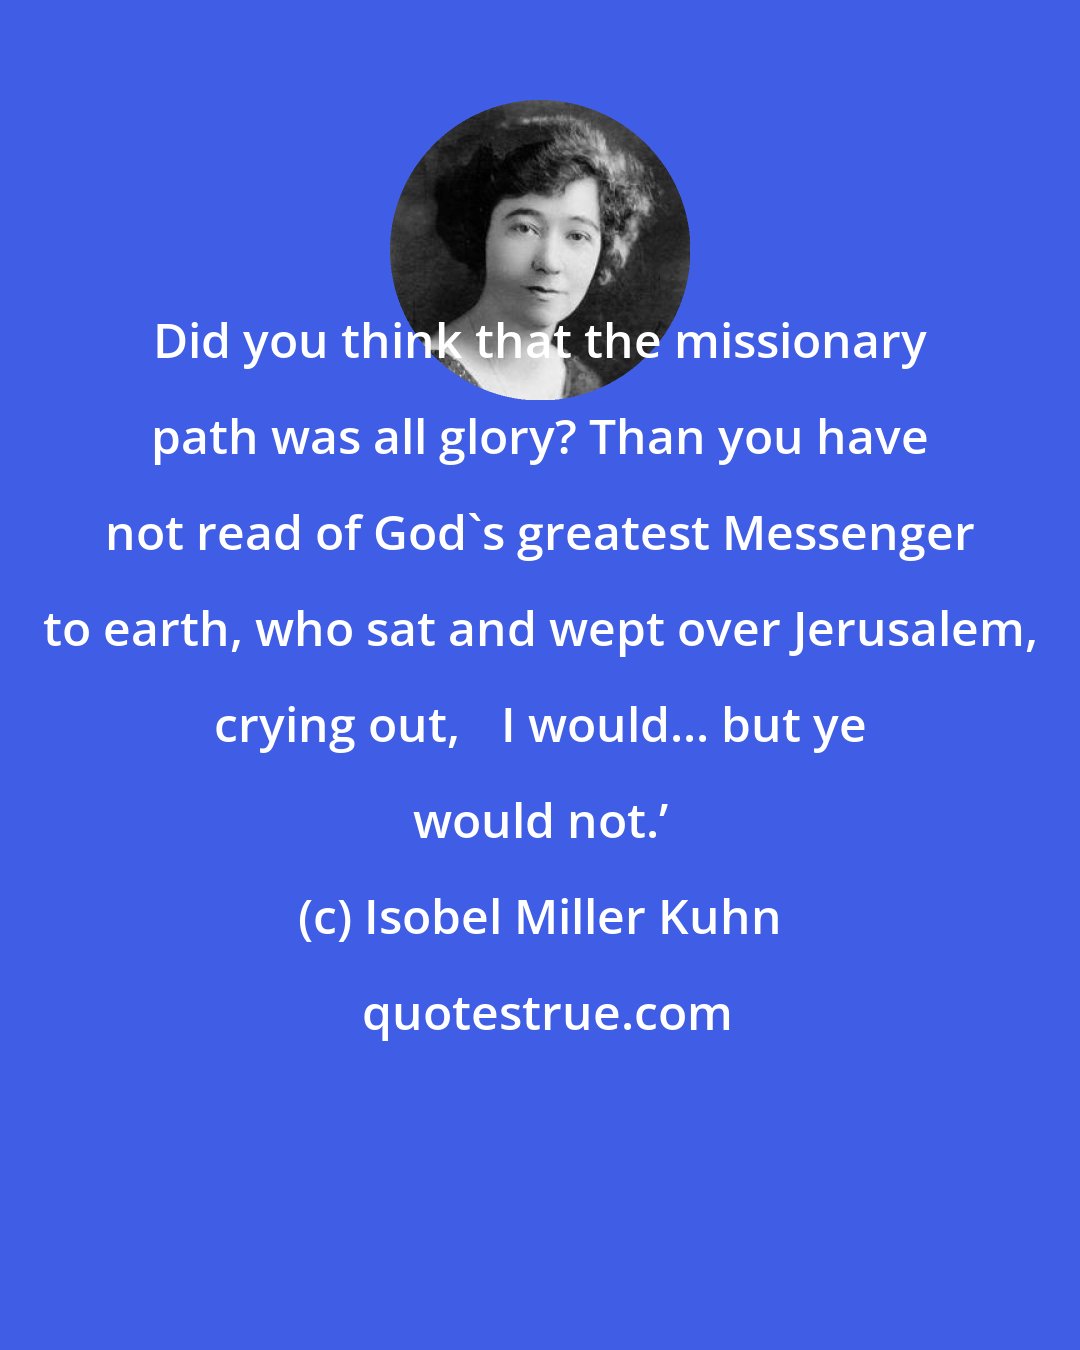 Isobel Miller Kuhn: Did you think that the missionary path was all glory? Than you have not read of God's greatest Messenger to earth, who sat and wept over Jerusalem, crying out, ʻI would... but ye would not.ʼ